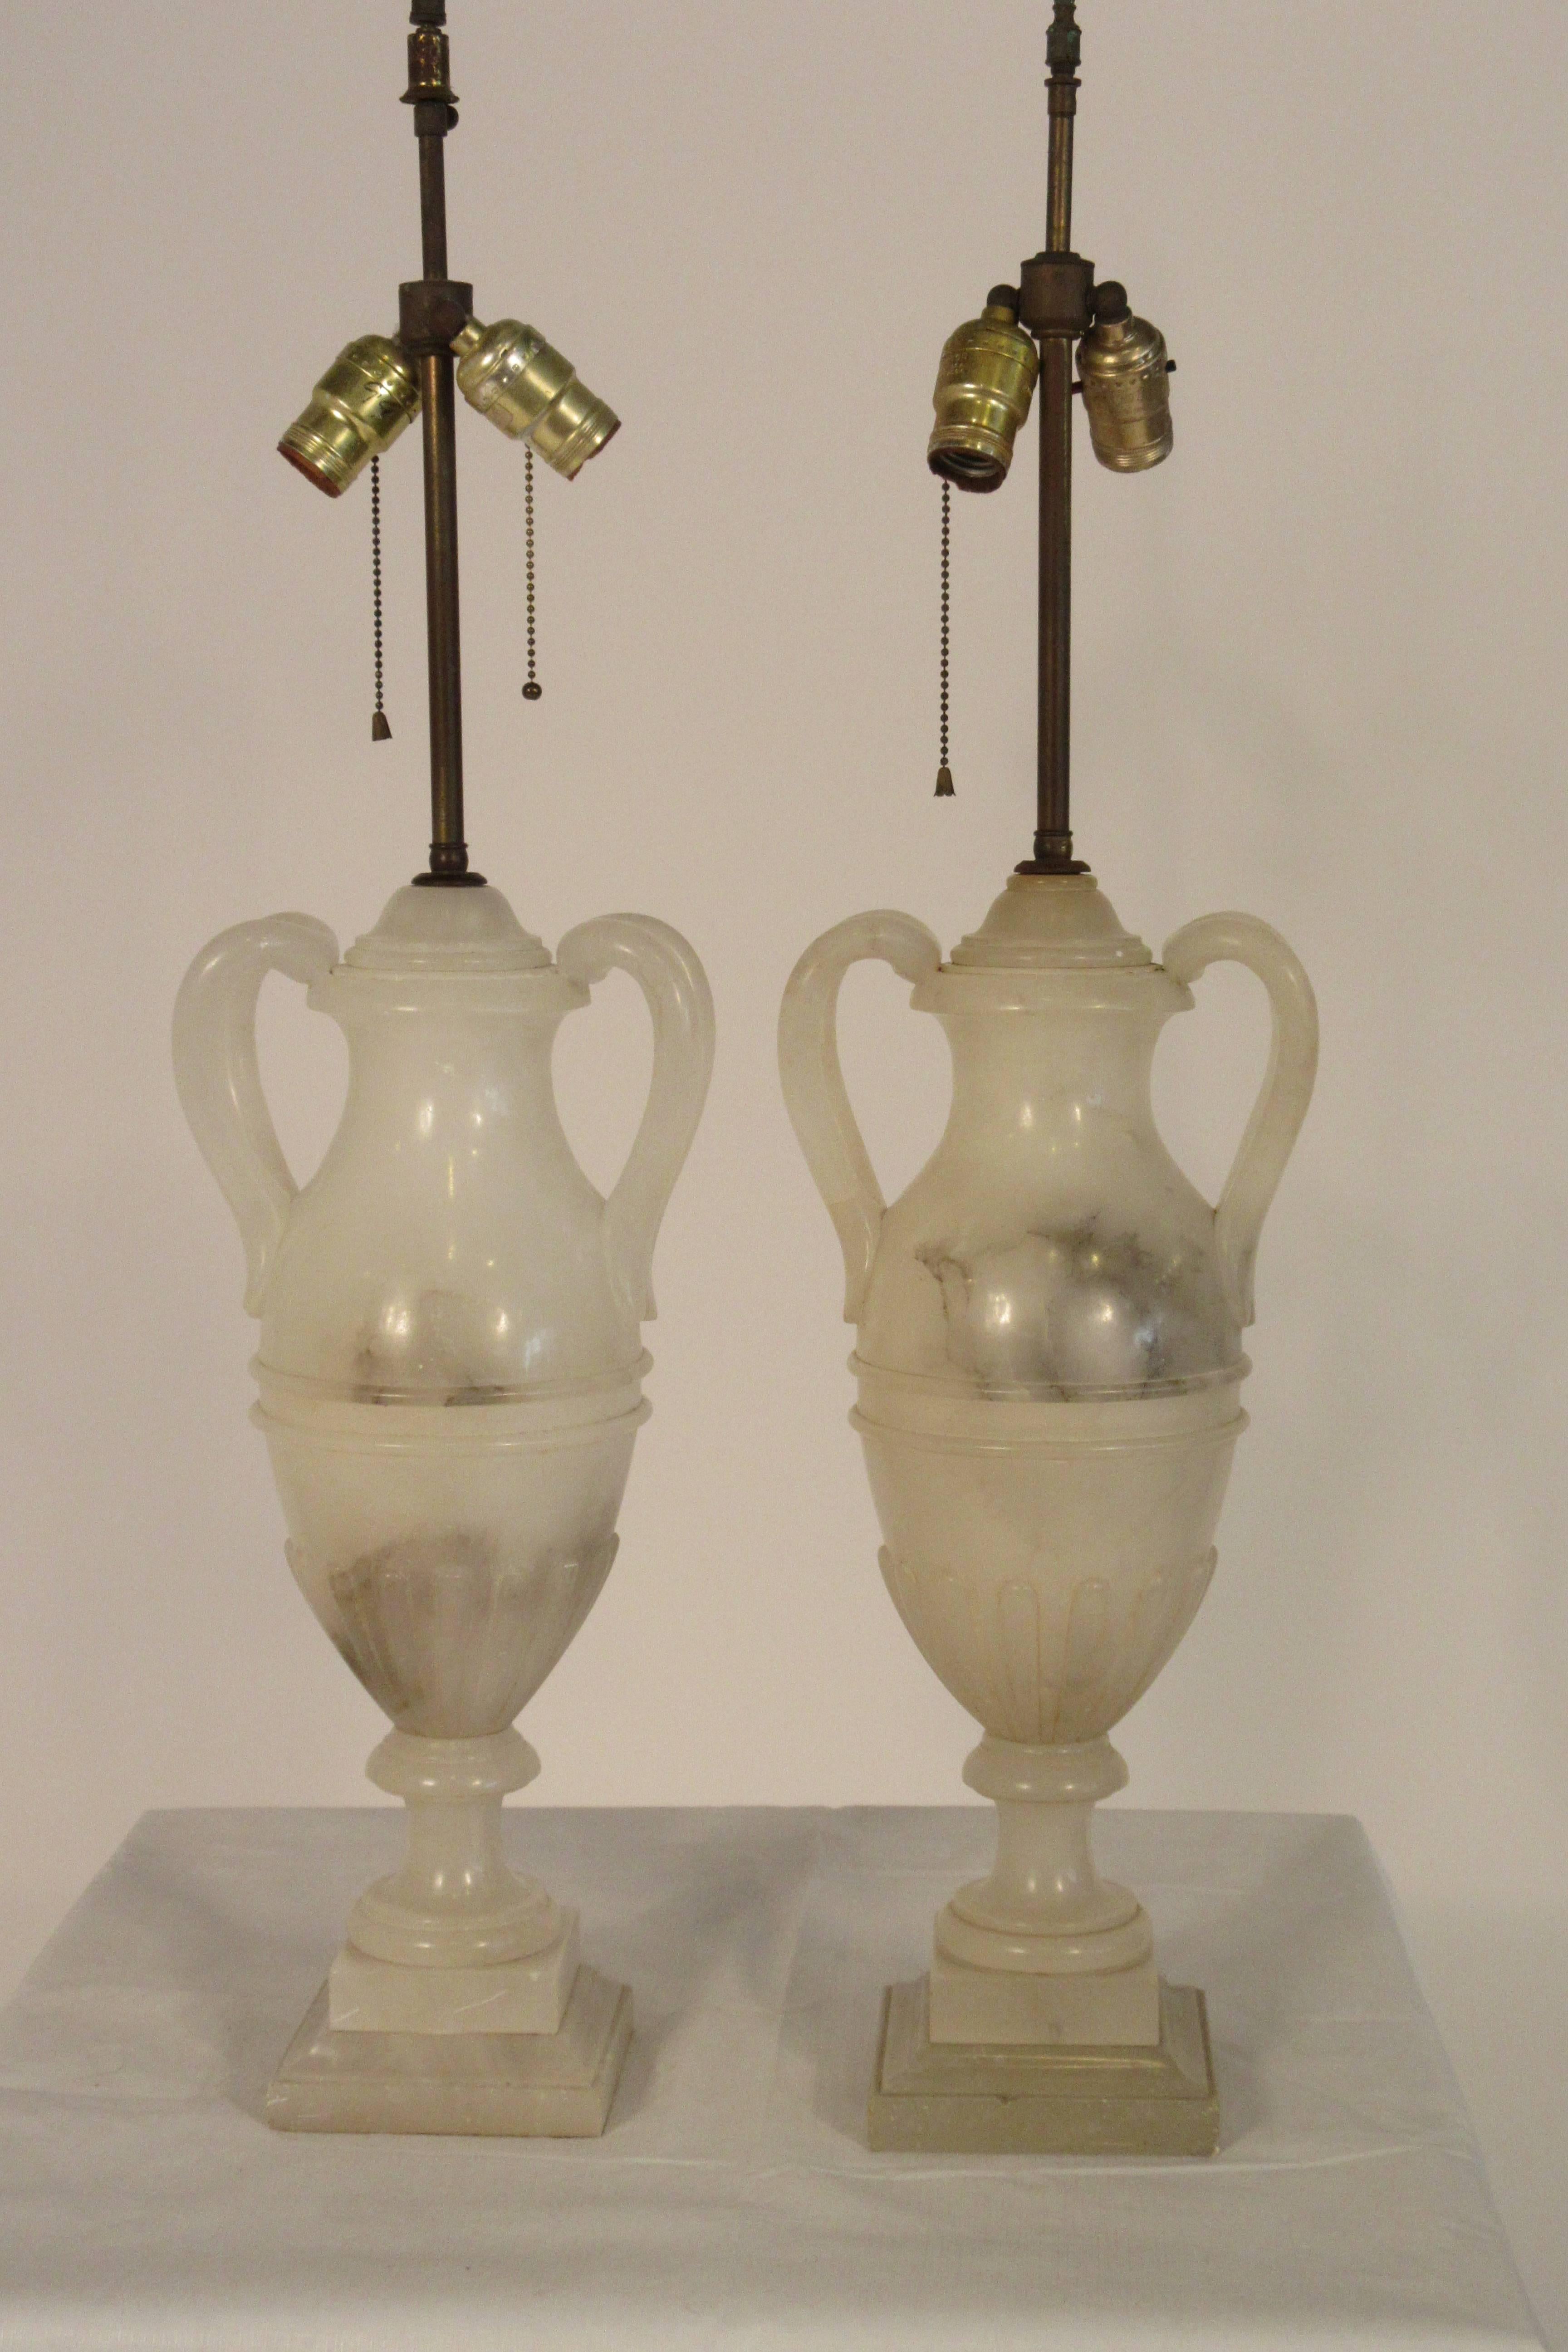 Pair of 1940s Alabaster classical urn lamps. The handles are so graceful. From a Rye, NY estate.